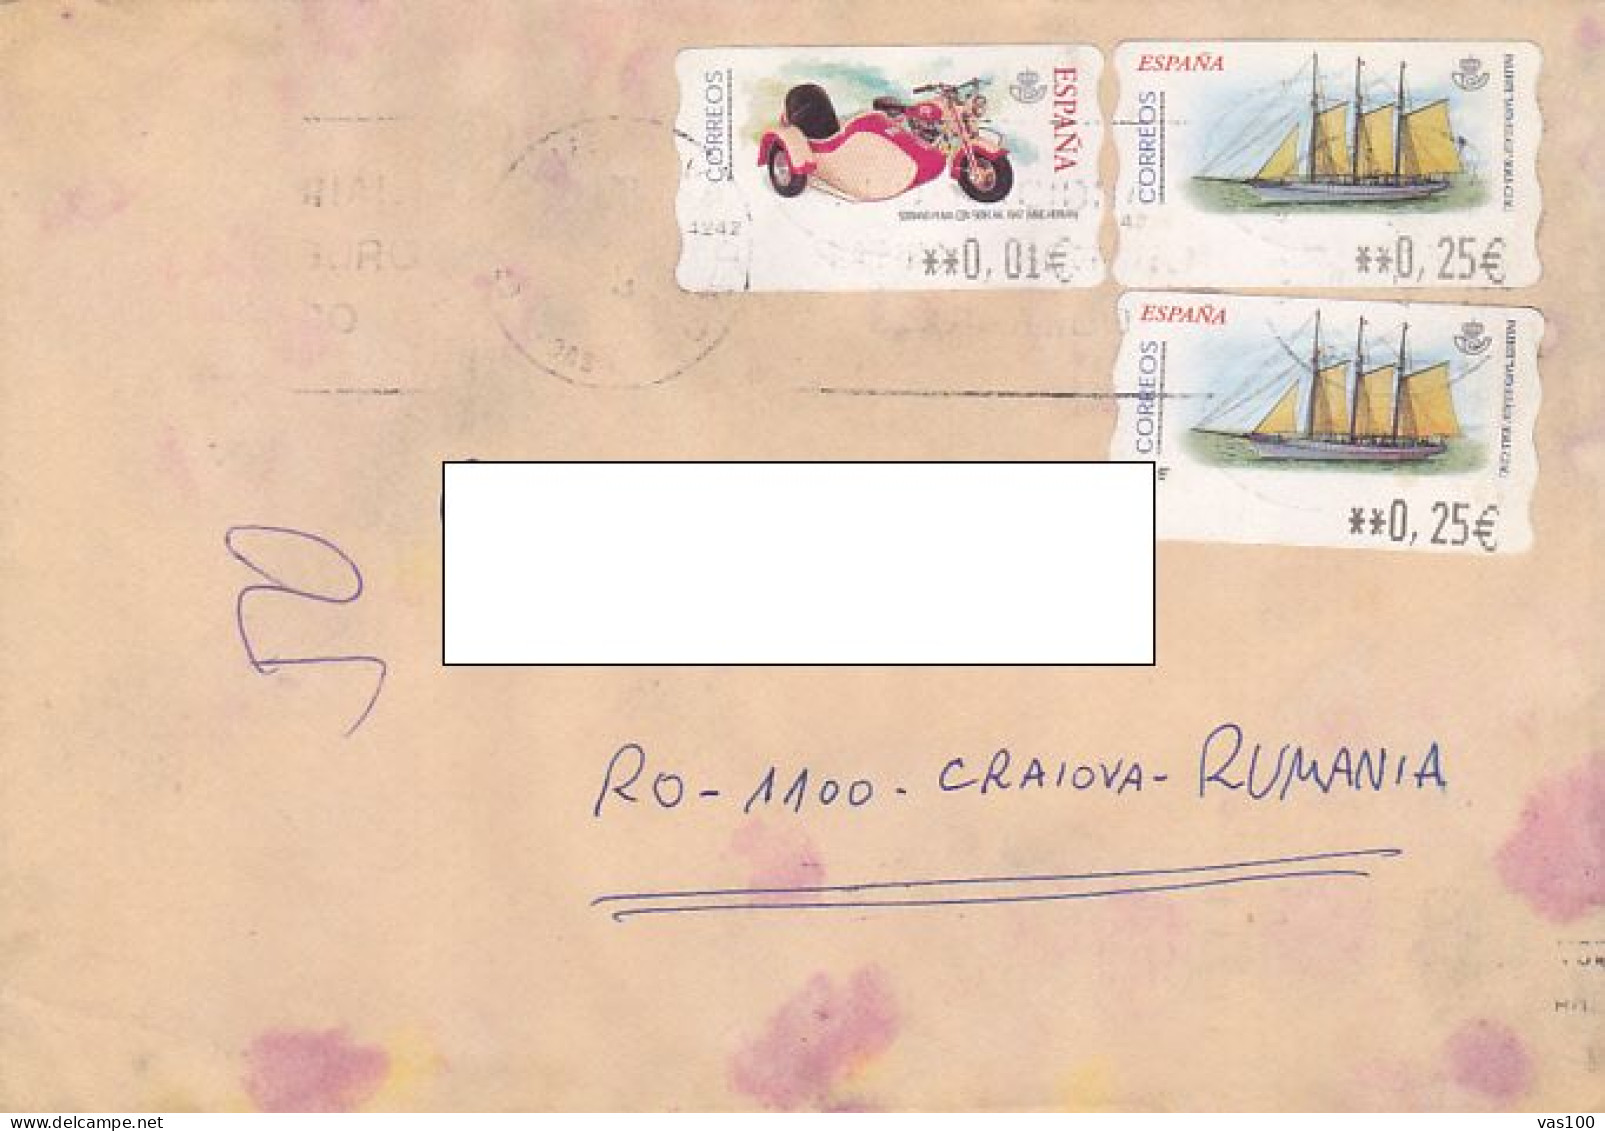 MOTORBIKE WITH SIDECAR, SHIP, STAMPS ON COVER, 2003, SPAIN - Brieven En Documenten